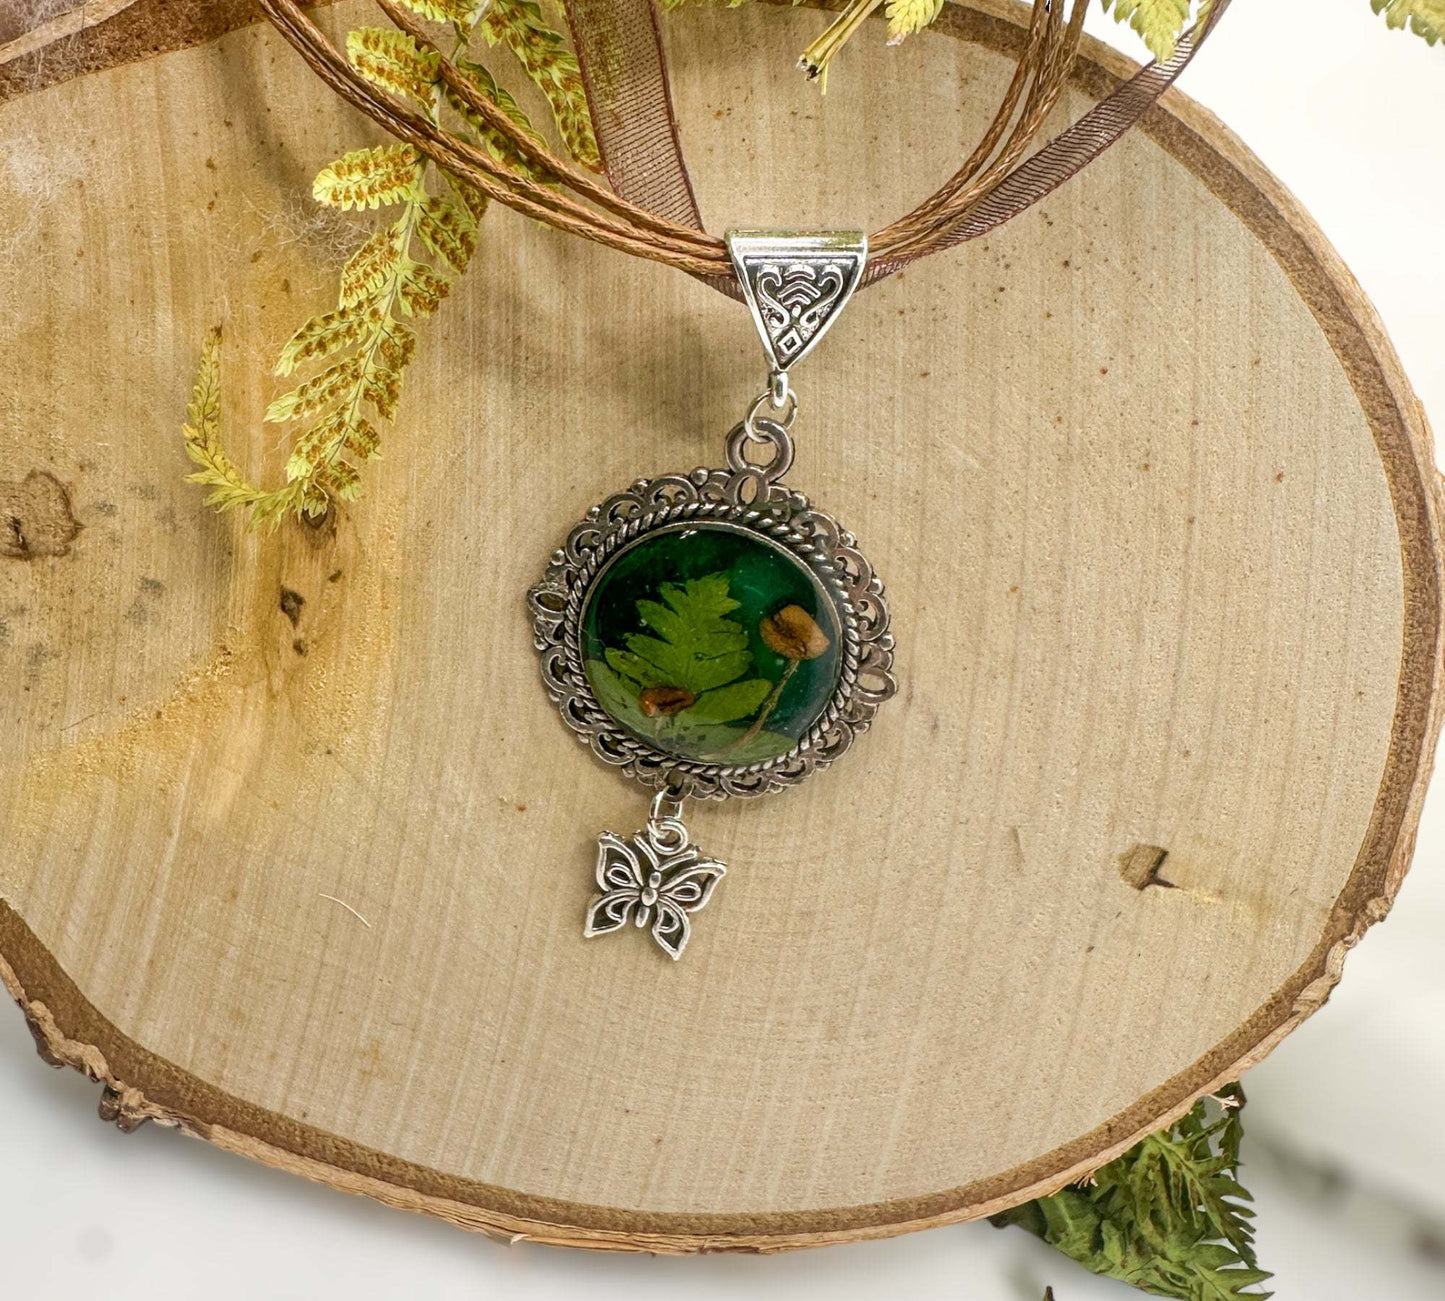 Mushroom Pendant - Magical Green Forest with Silver Butterfly